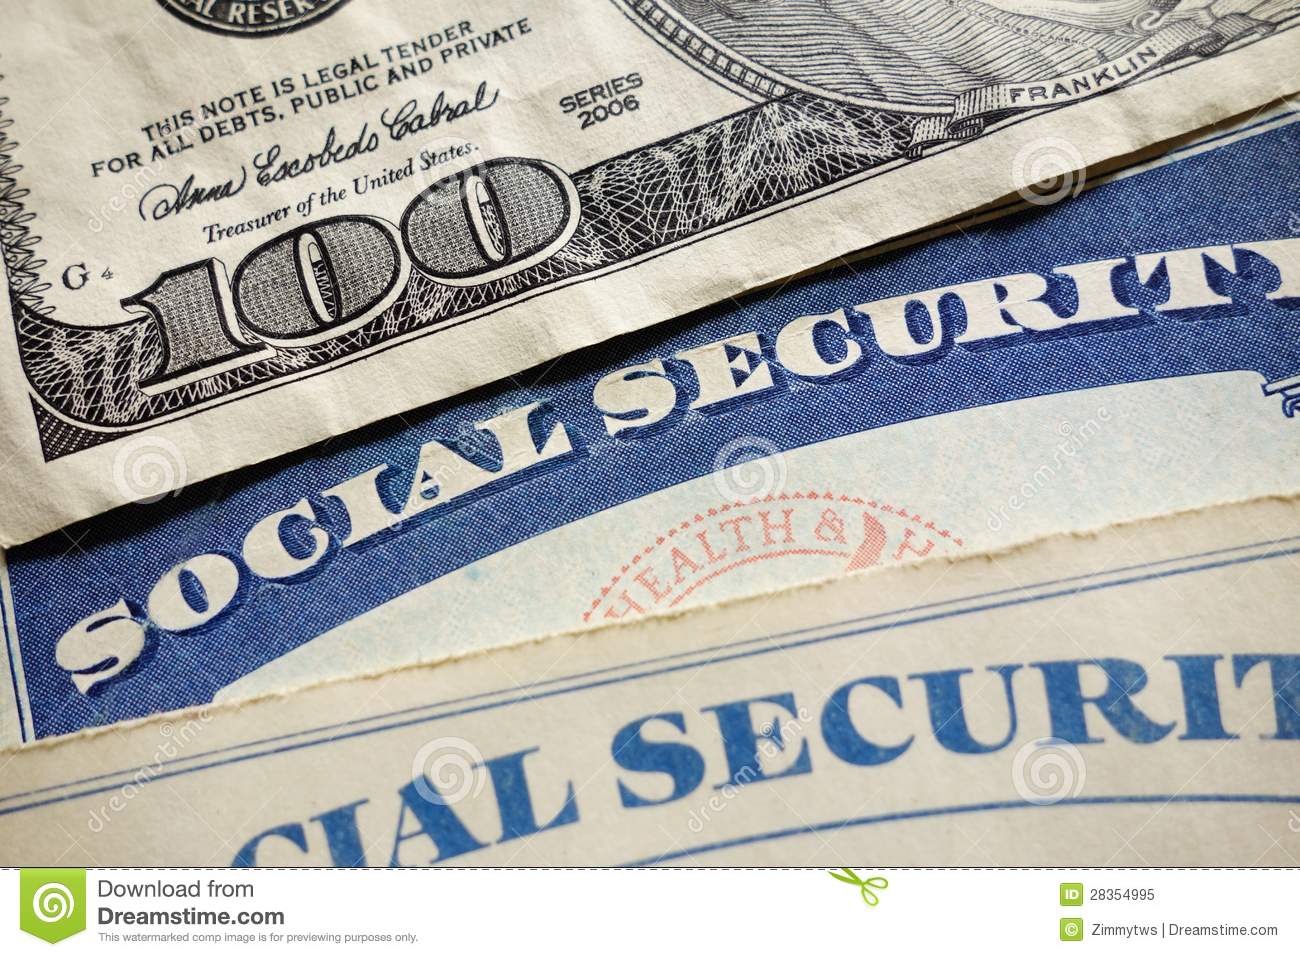 Social Security Cards Royalty Free Stock Photo   Image  28354995